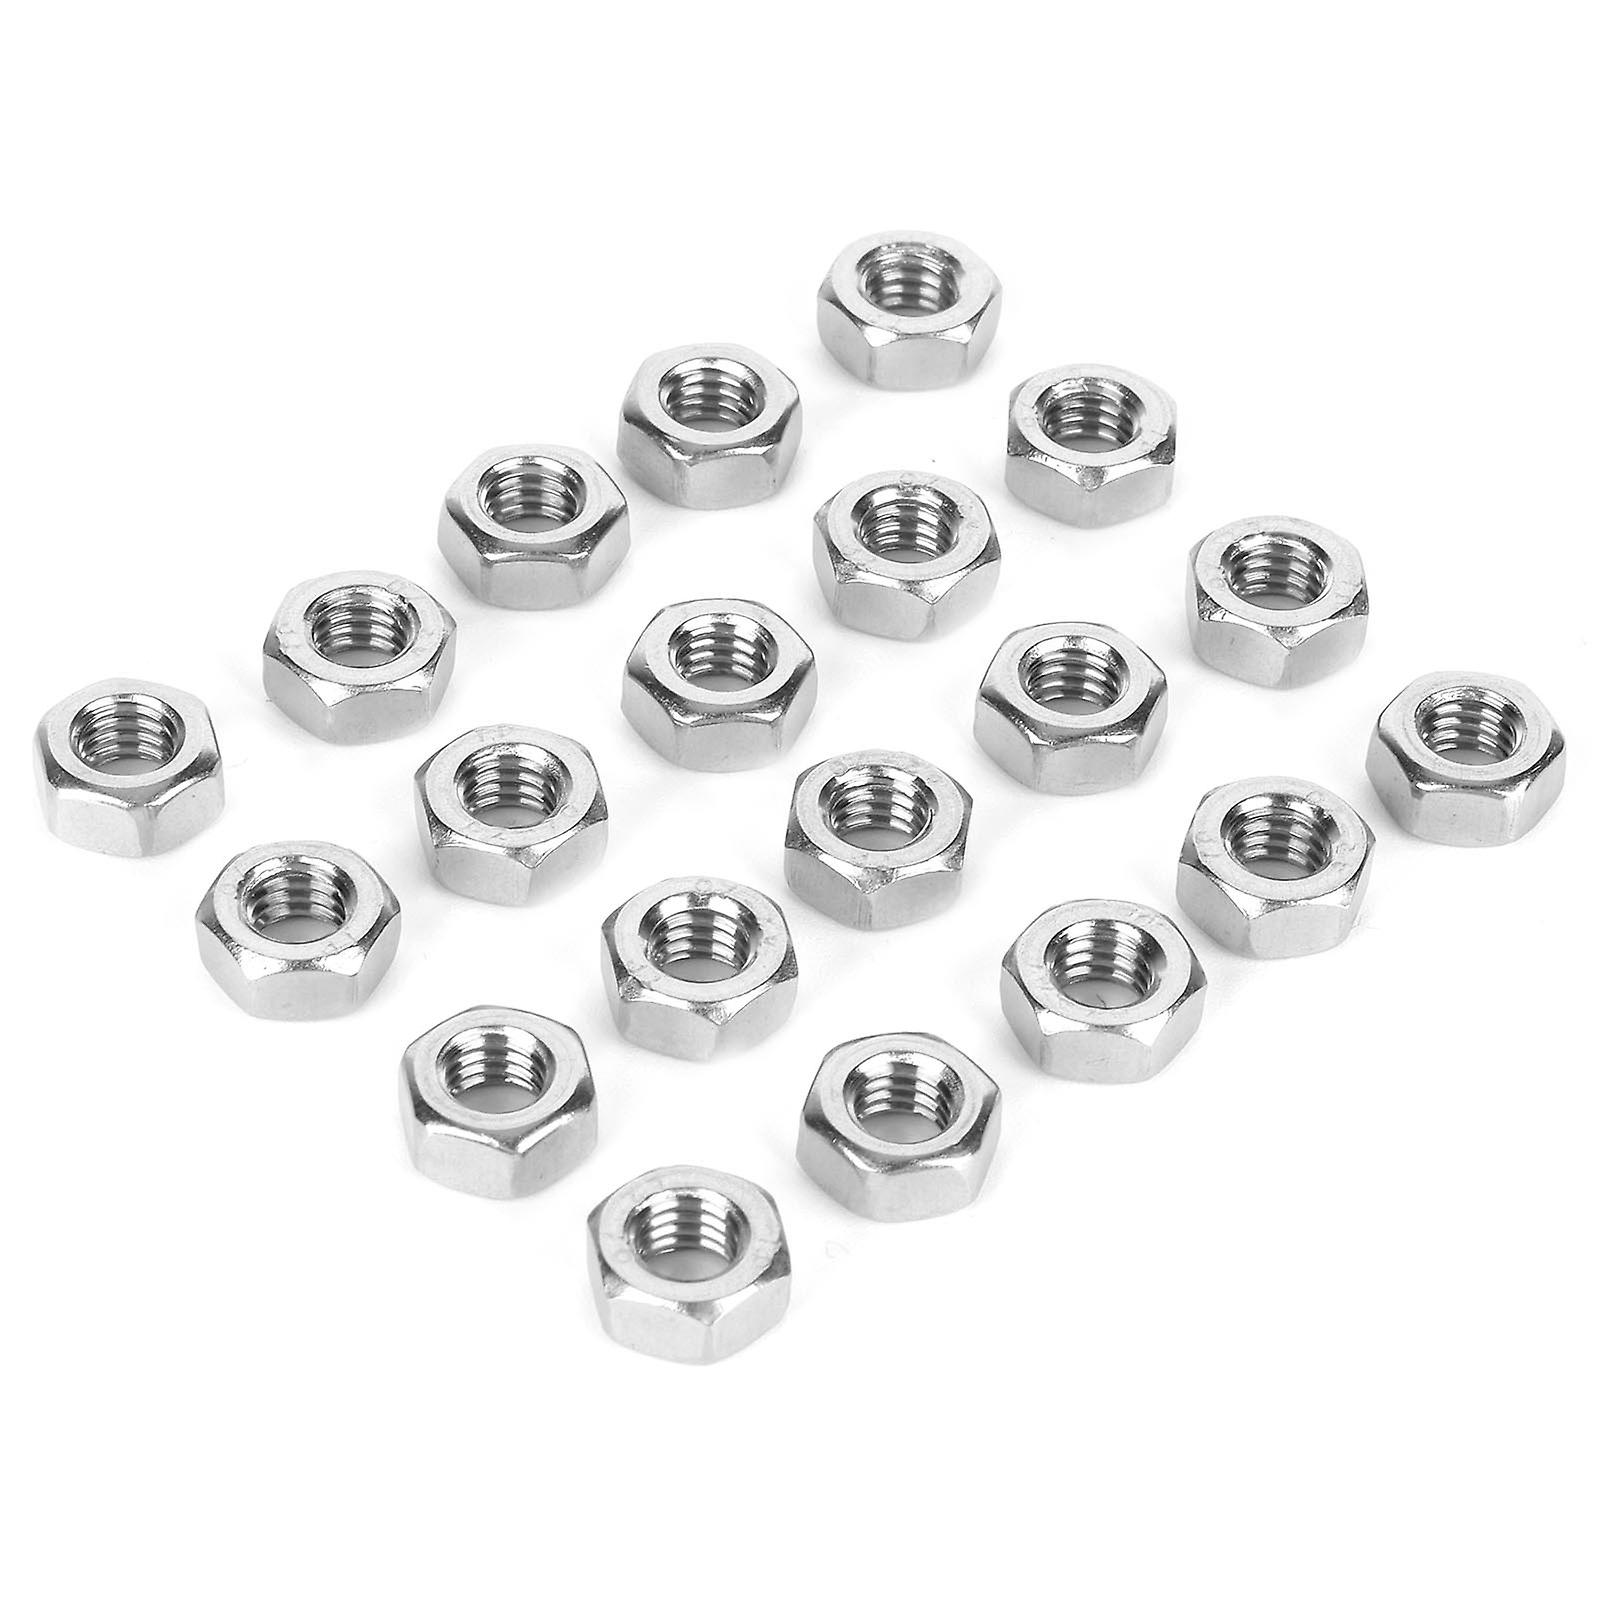 20pcs/bag 304 Stainless Steel M6 Hex Nut Fasteners For Greenhouse Supplies Accessories